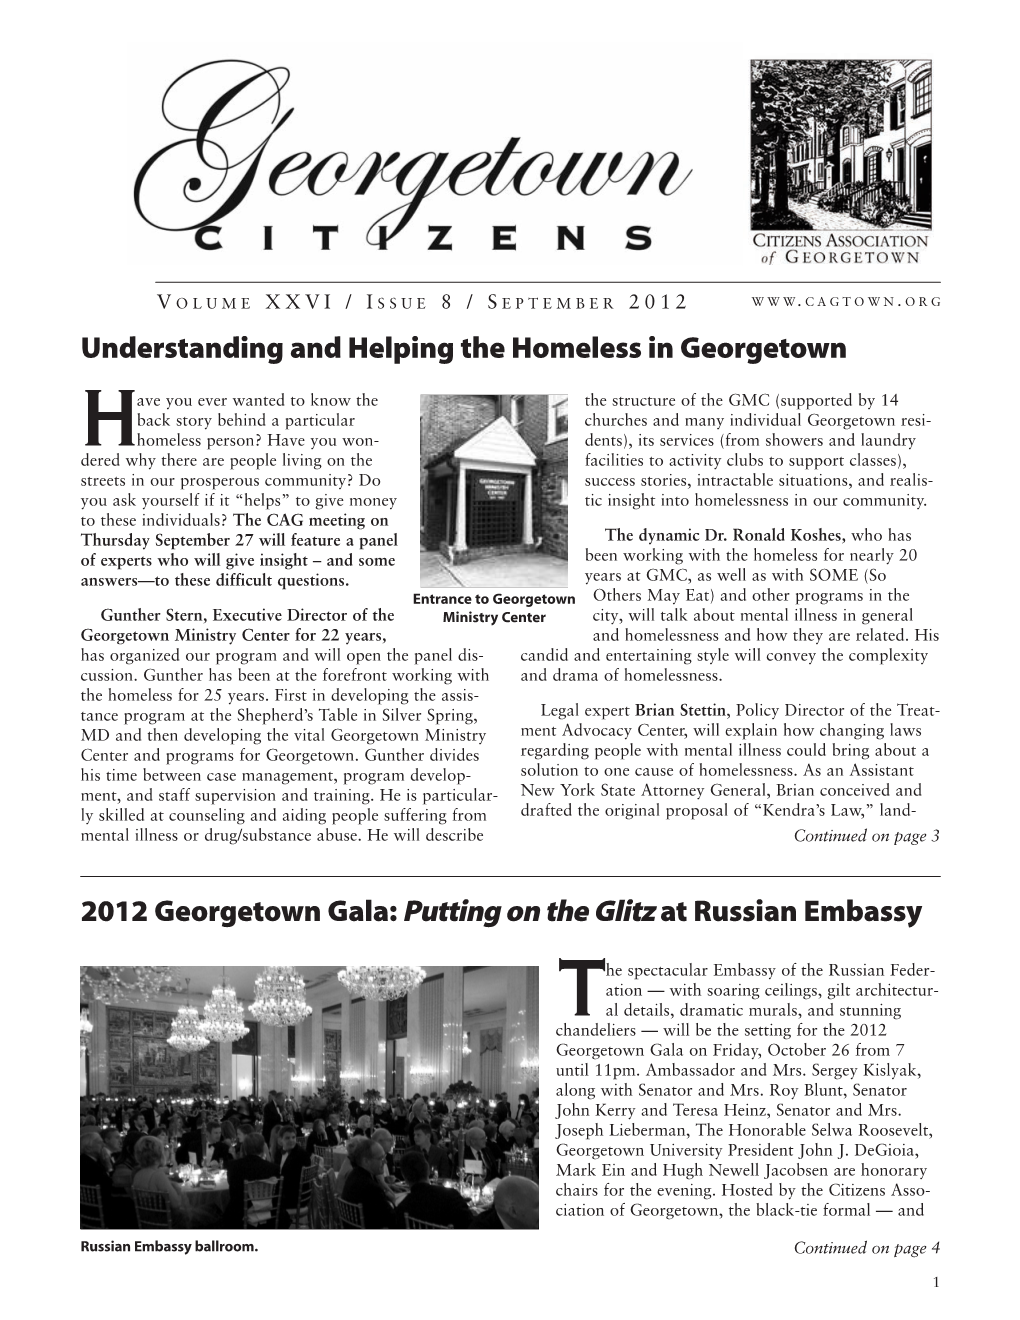 Understanding and Helping the Homeless in Georgetown 2012